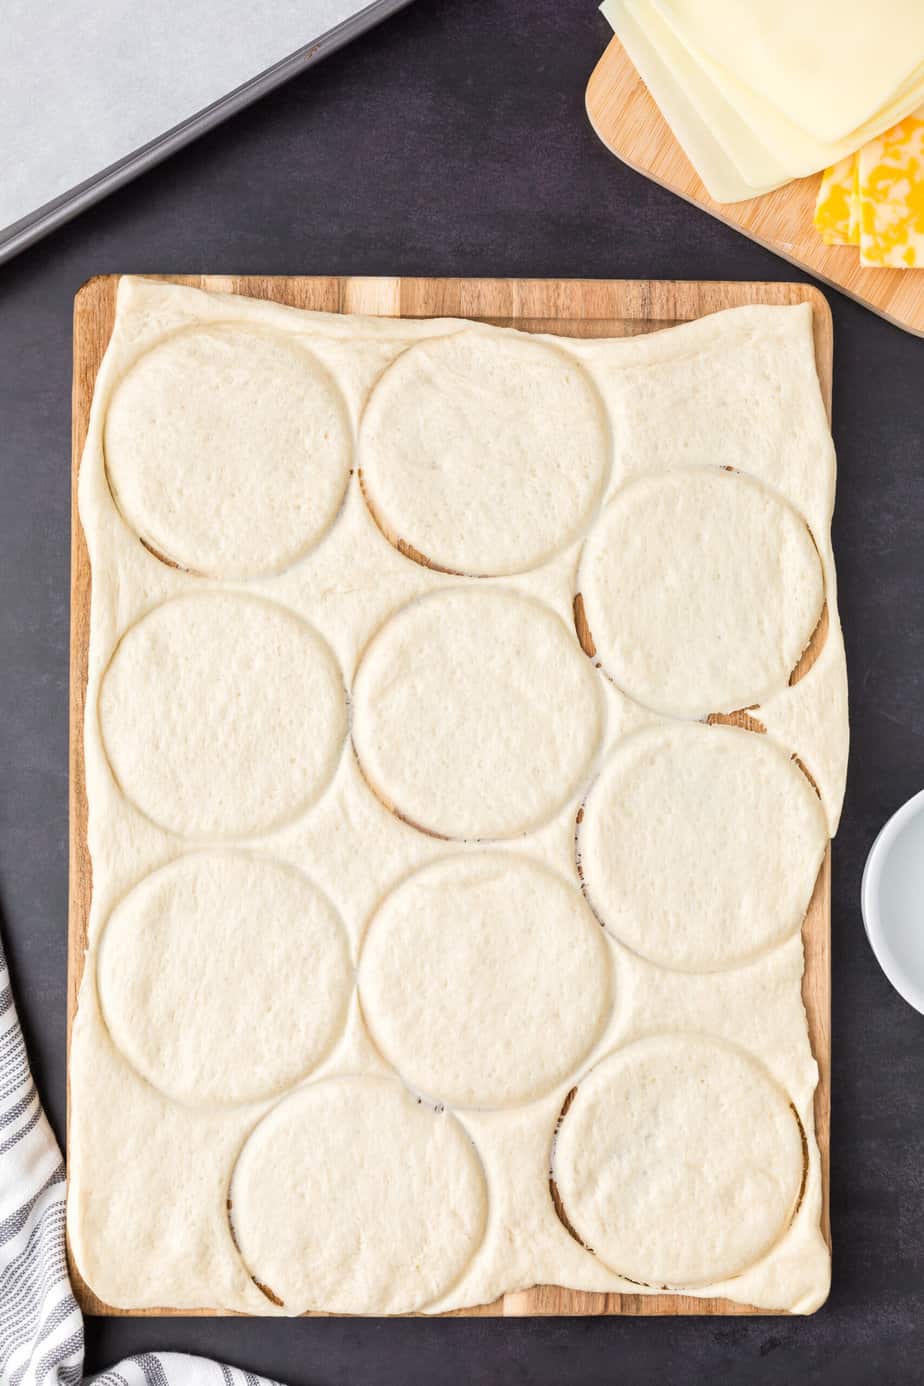 Cutting pizza dough into circles that are about two inches across.